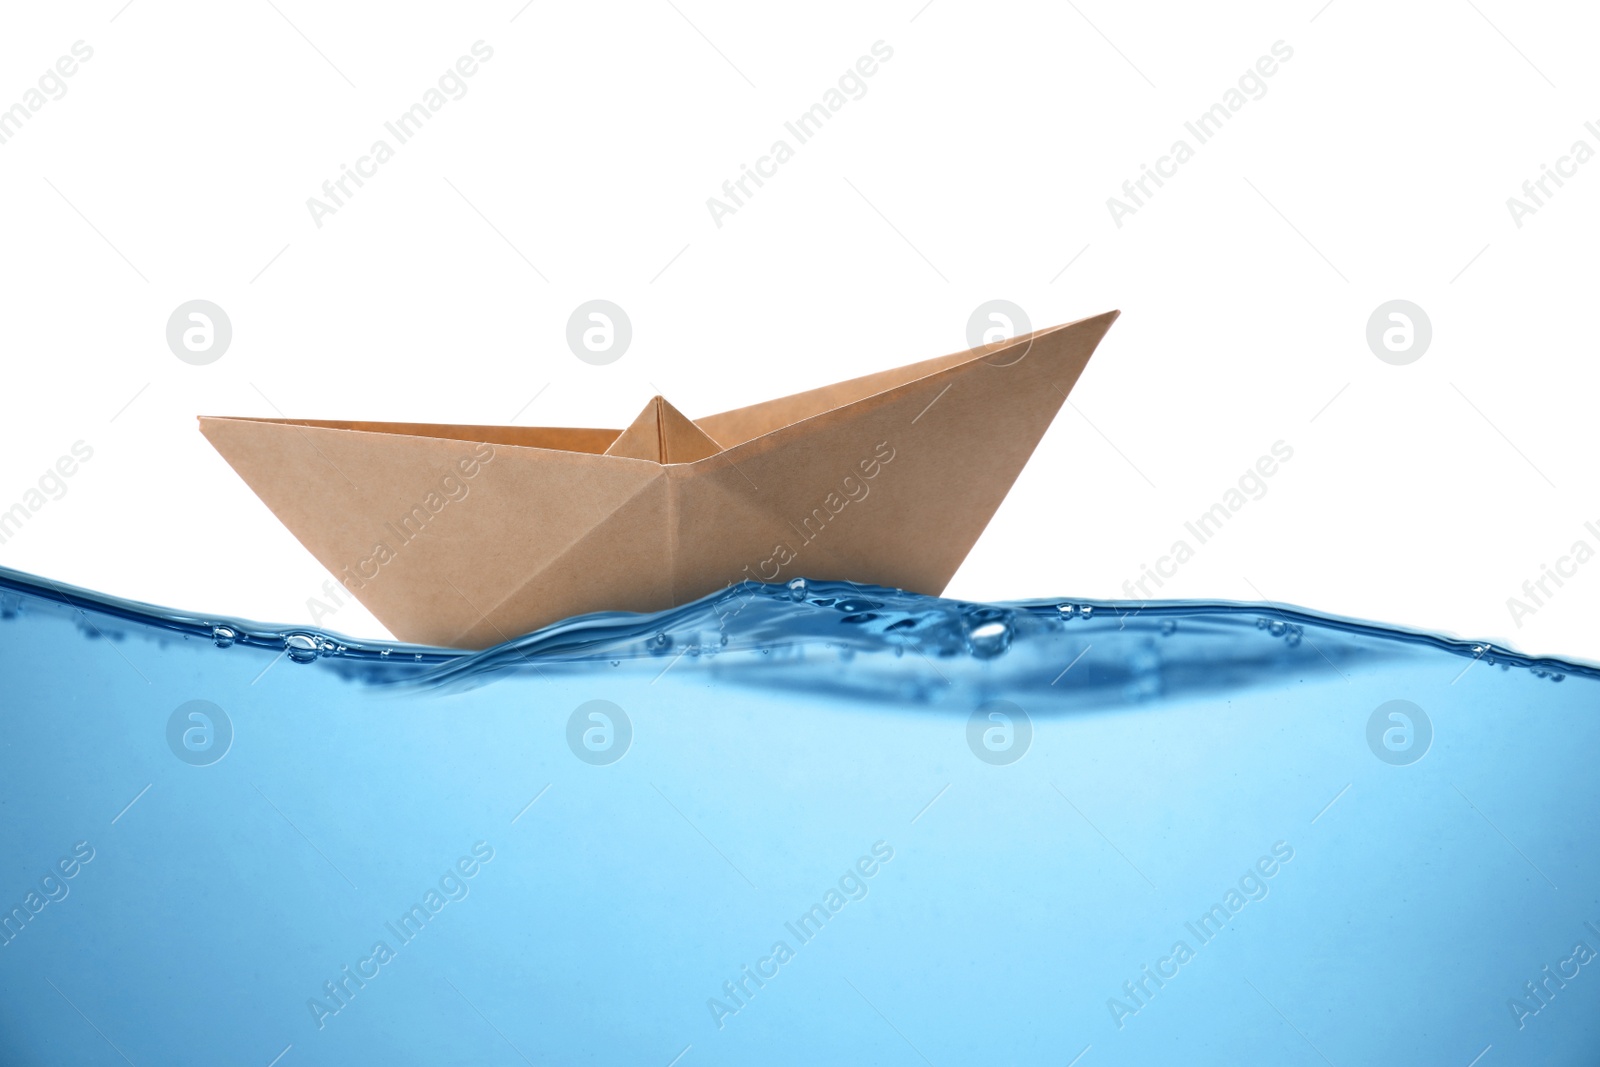 Image of Handmade kraft paper boat floating on clear water against white background 